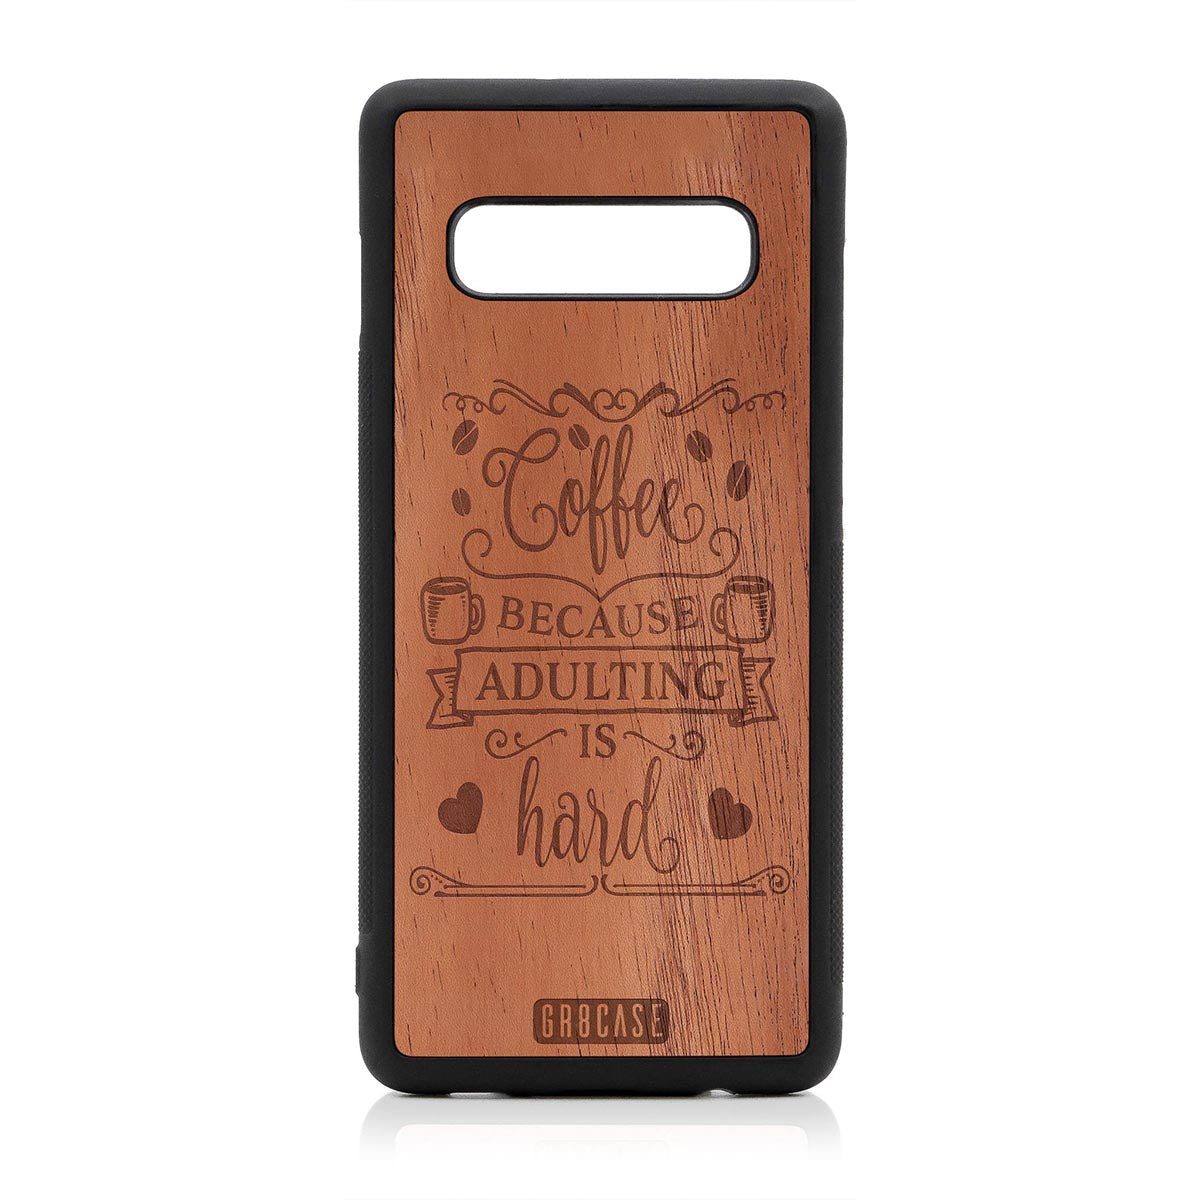 Coffee Because Adulting Is Hard Design Wood Case For Samsung Galaxy S10 Plus by GR8CASE